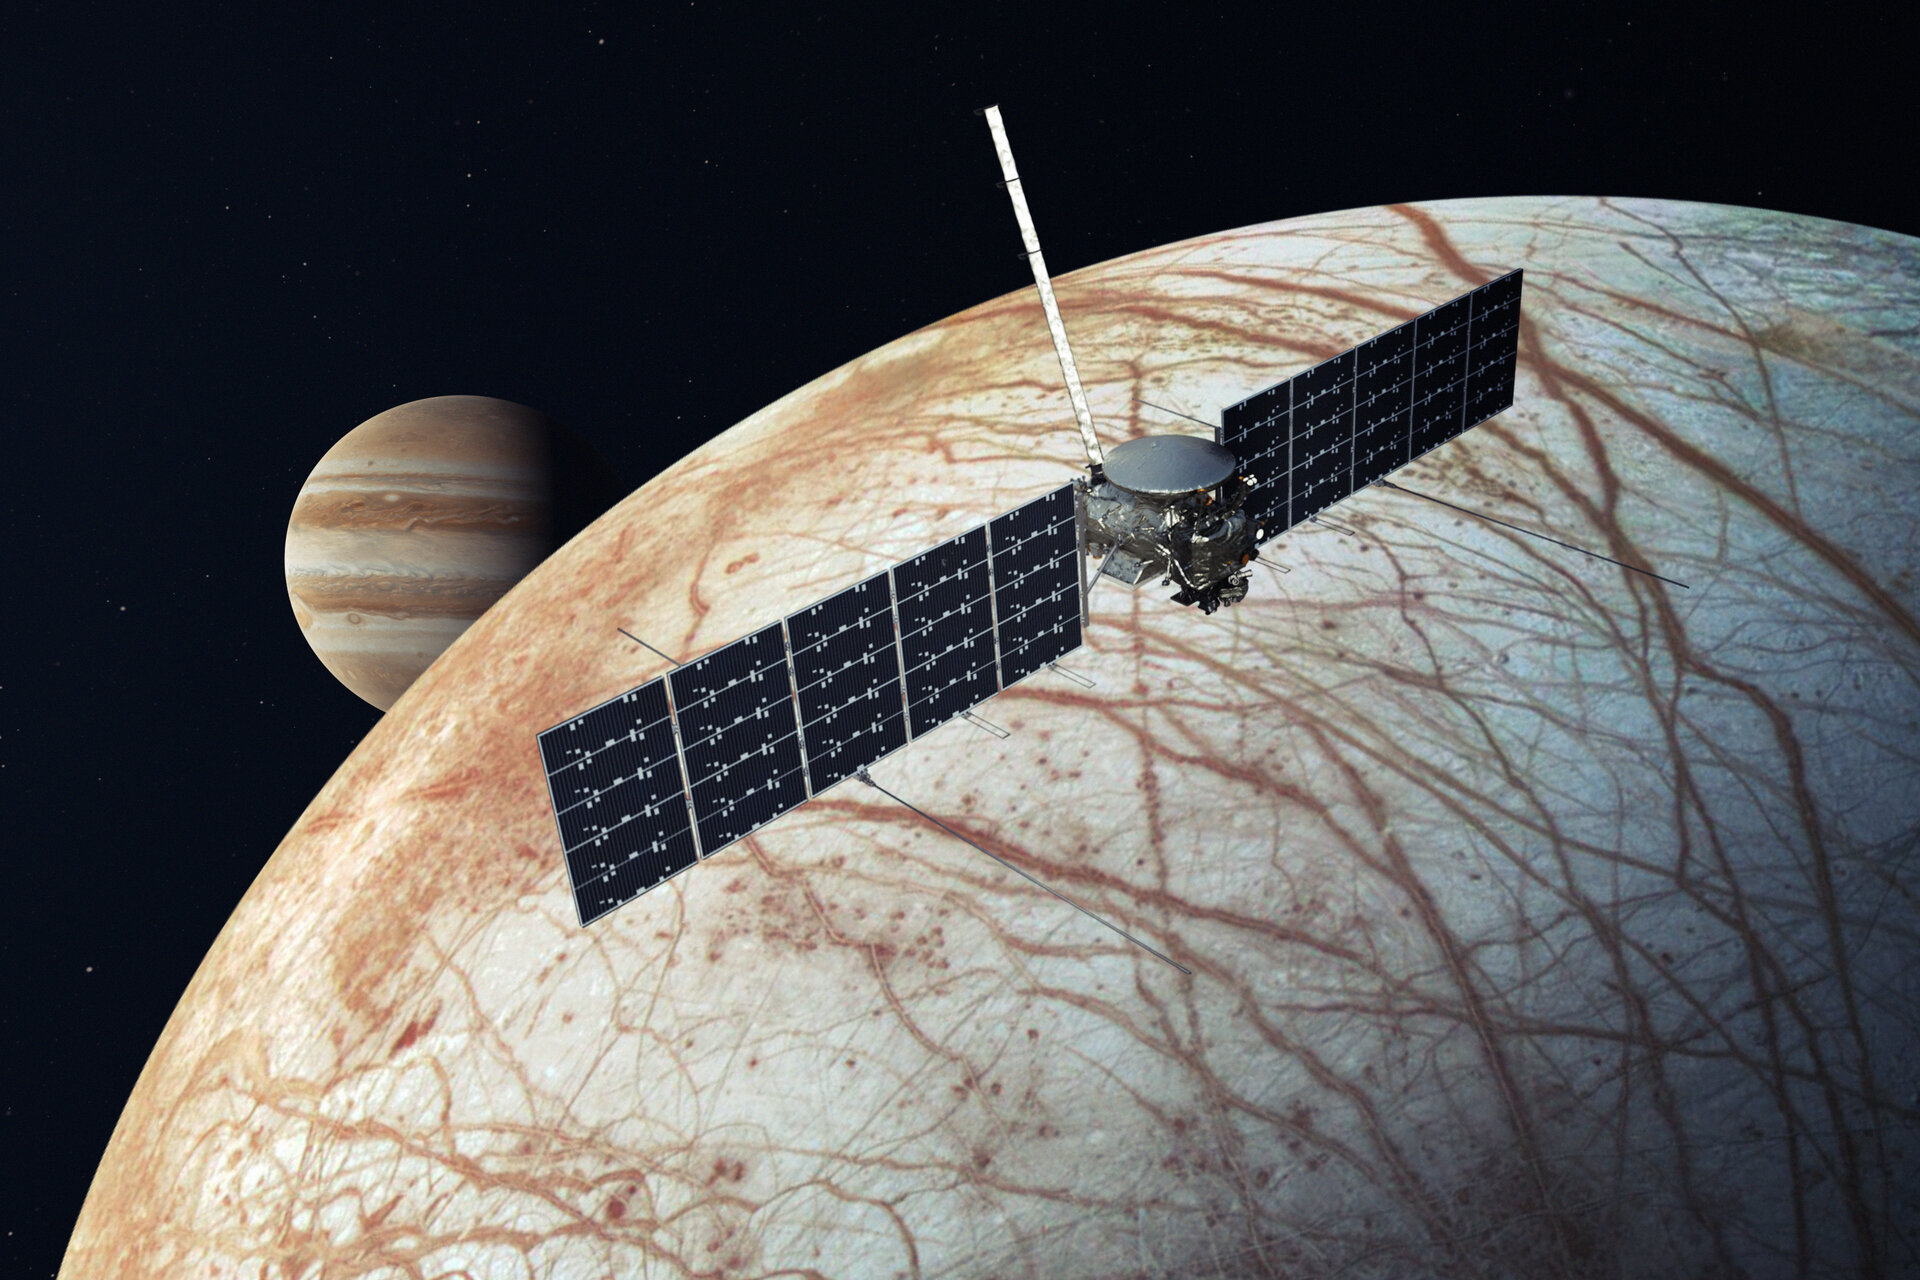 NASA's Europa Clipper uses the same solar cells and panels as ESA's Juice